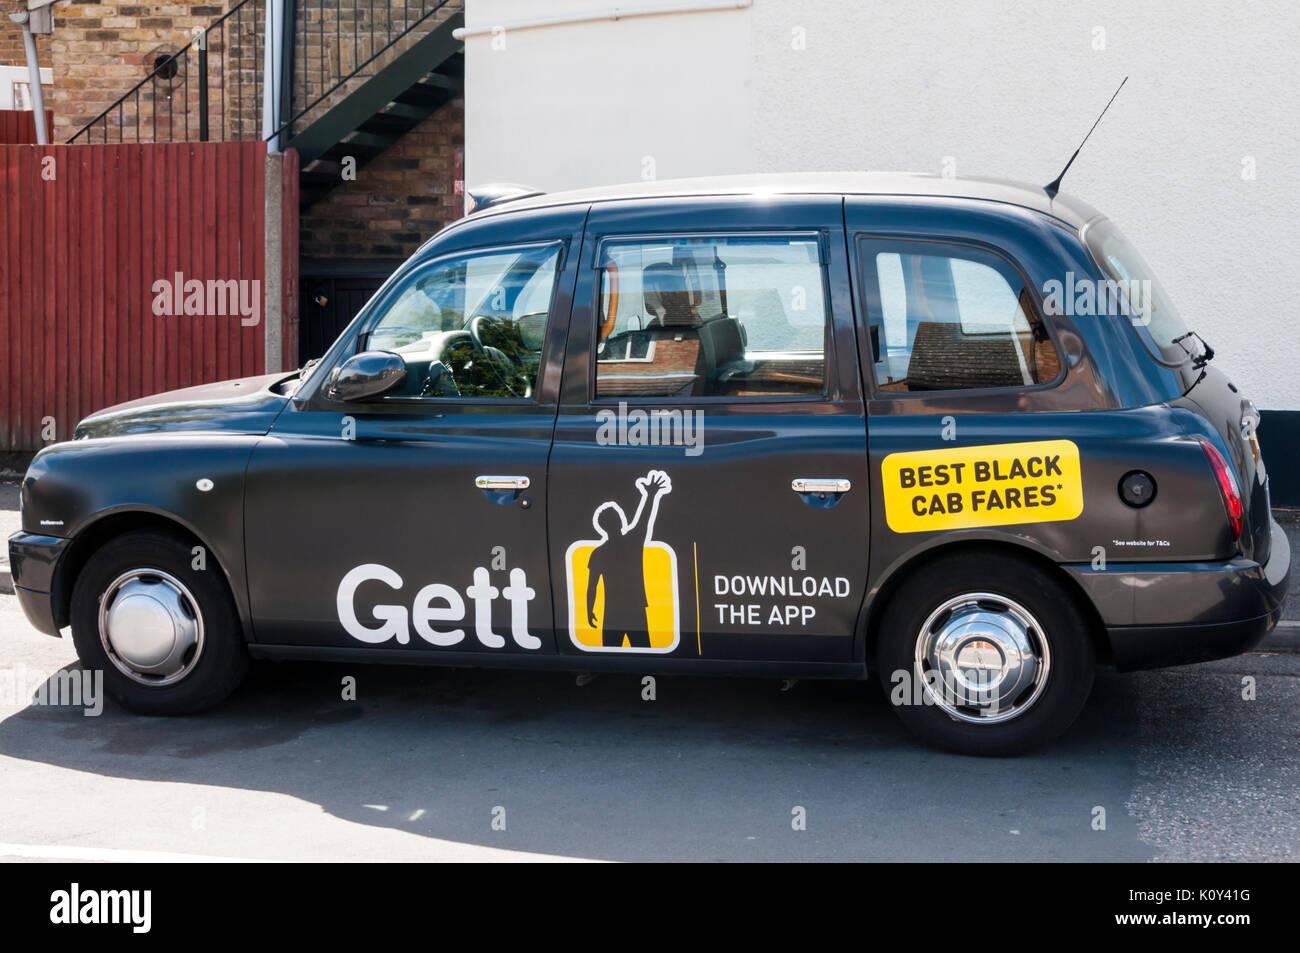 An advertisement for the Gett app on the side of a black London taxi Stock Photo